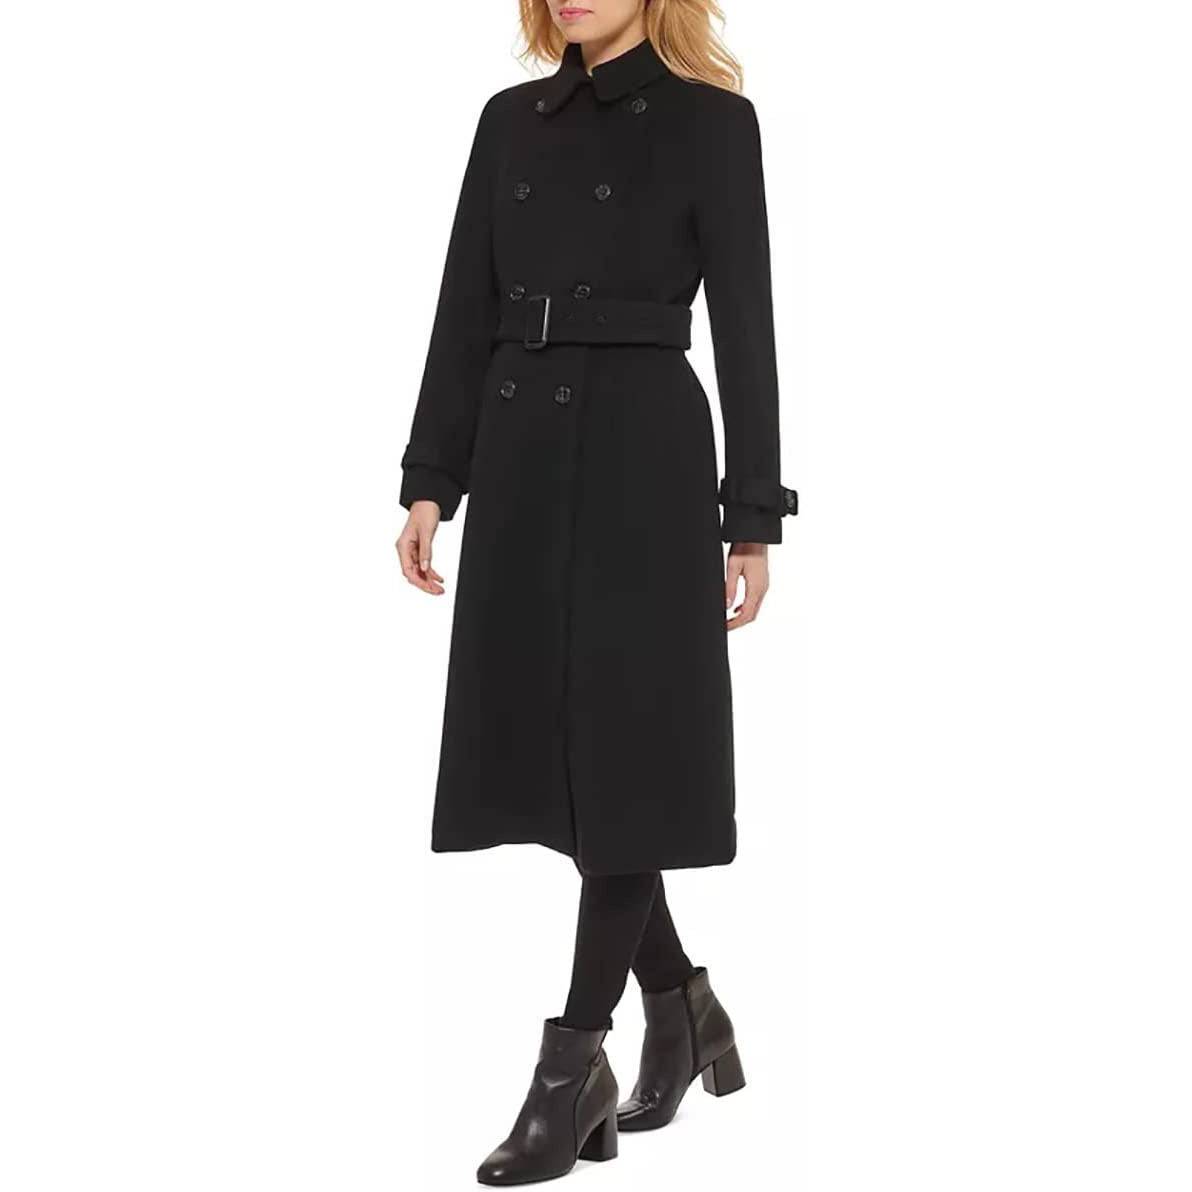 Cole Haan Women's Double Breasted Trench Coat - Zooloo Leather